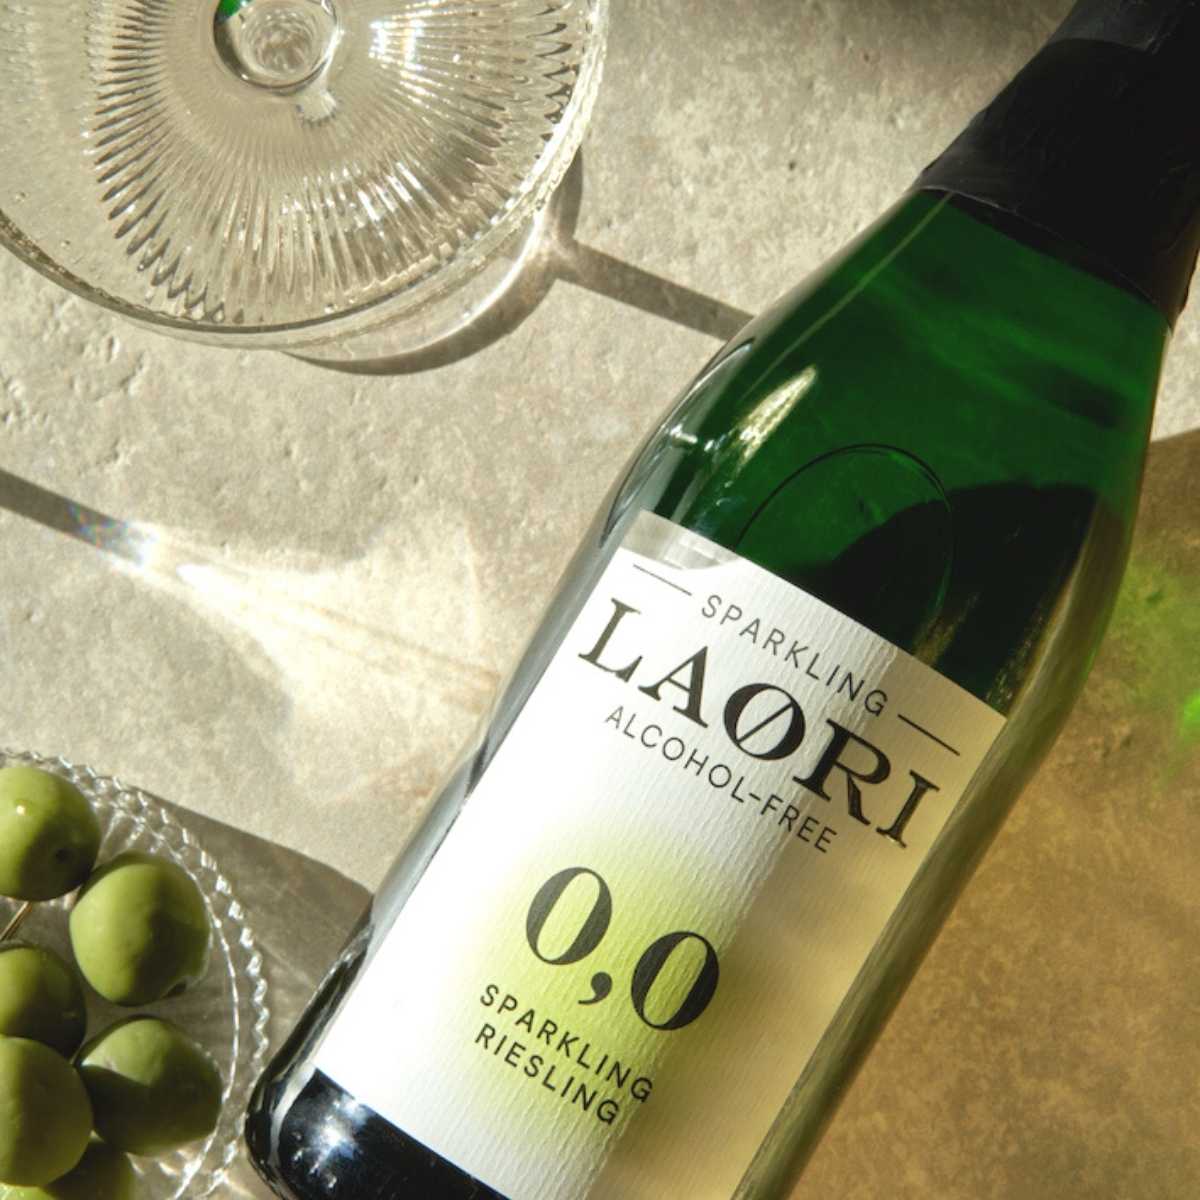 Have it all: 6x Laori Sparkling Riesling (0.75l) - value package